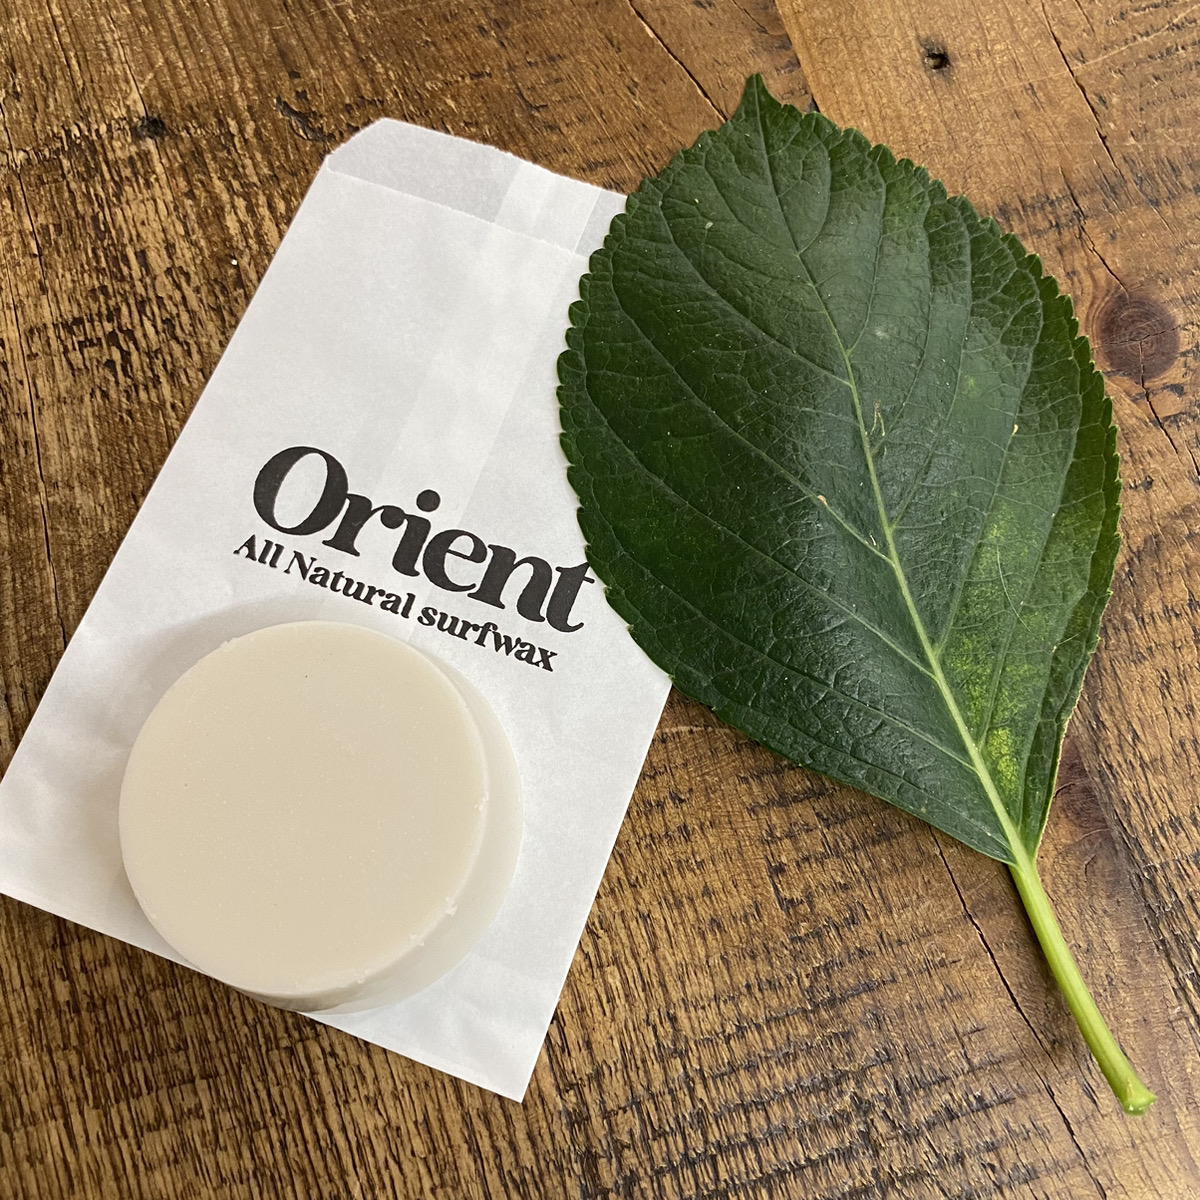 ORIENT ALL NATURAL SURFWAX